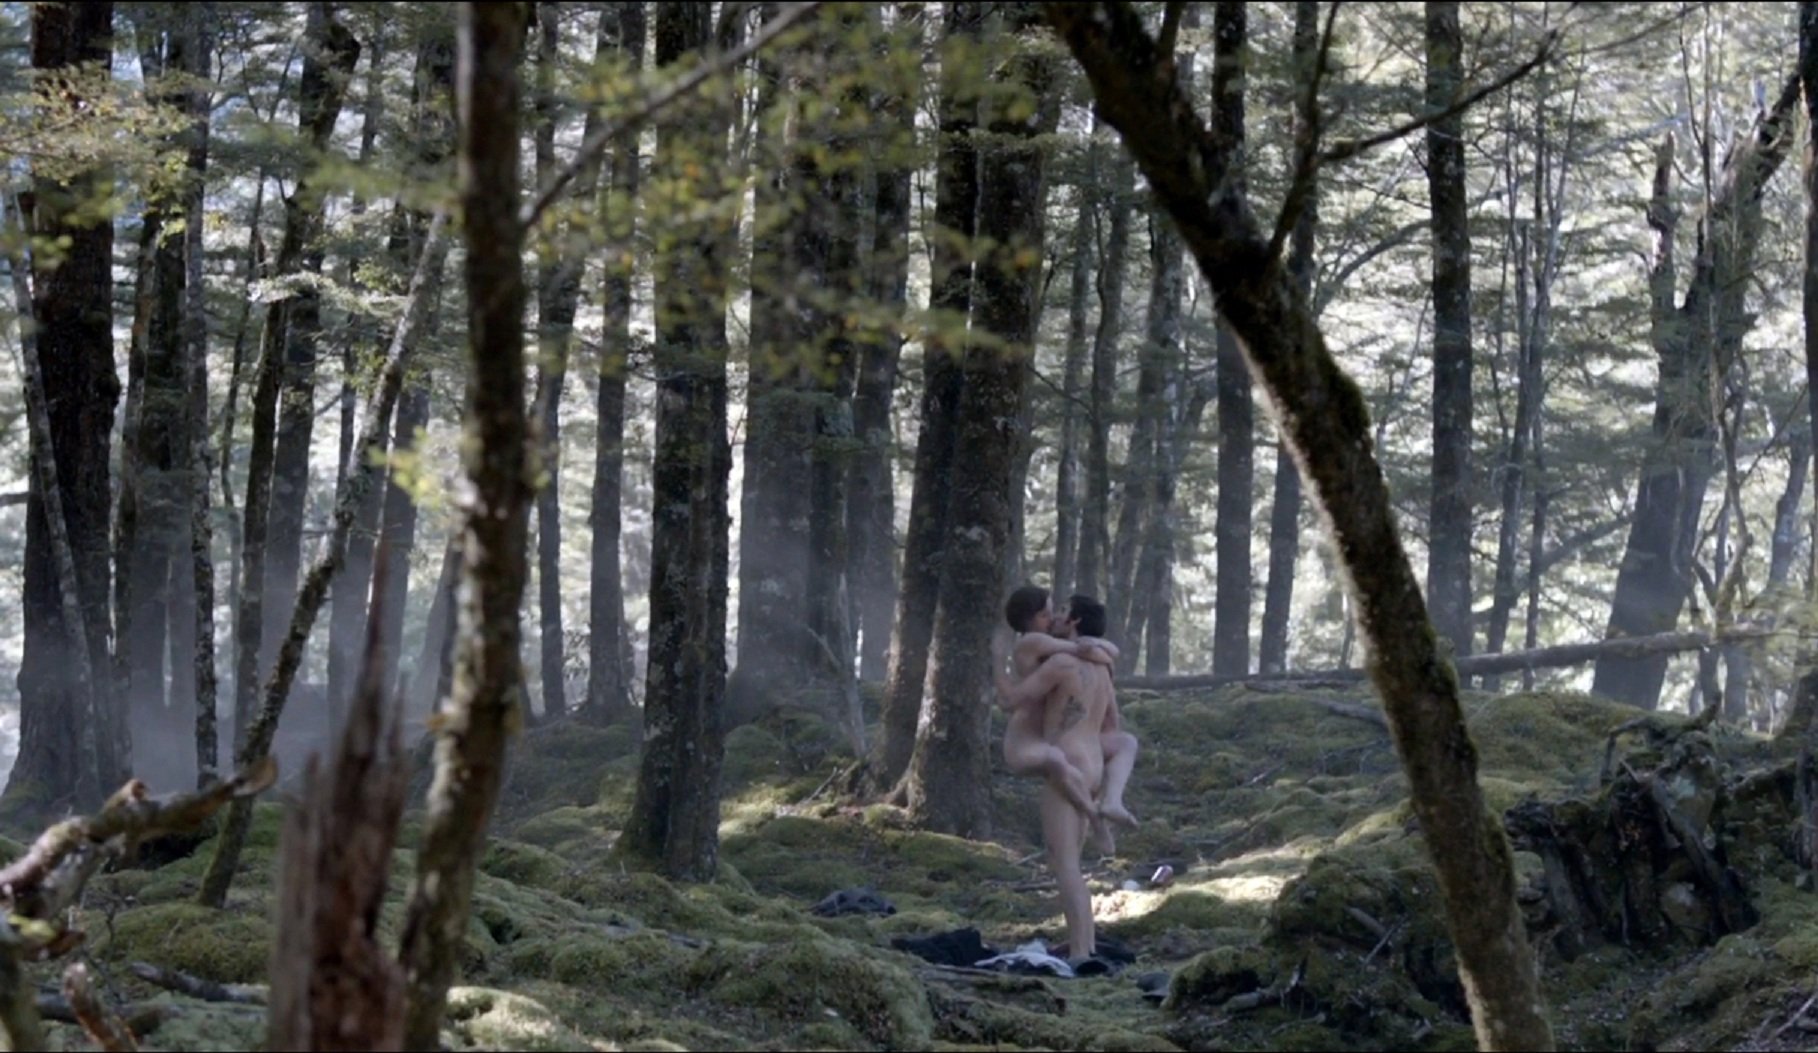 Naked Elisabeth Moss In Top Of The Lake